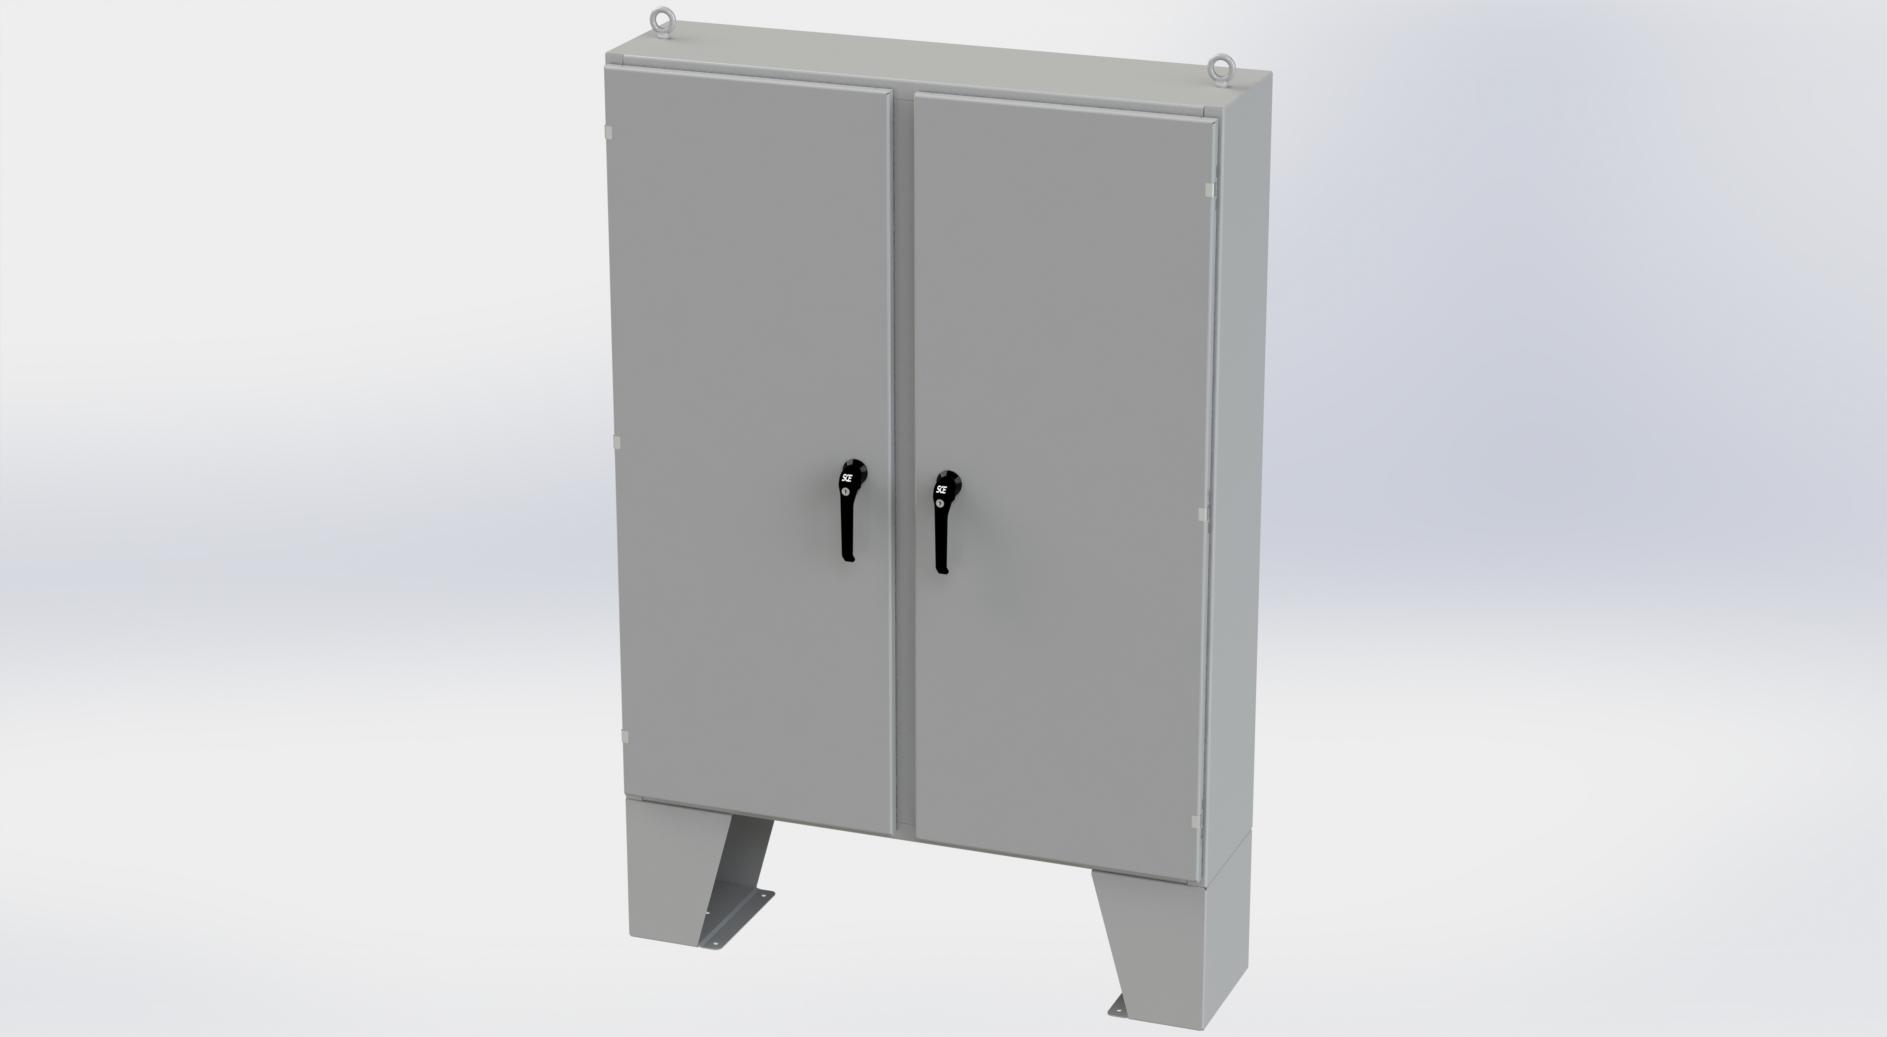 Saginaw Control SCE-60EL4812LPPL 2DR EL LPPL Enclosure, Height:60.00", Width:48.00", Depth:12.00", ANSI-61 gray powder coating inside and out. Optional sub-panels are powder coated white.